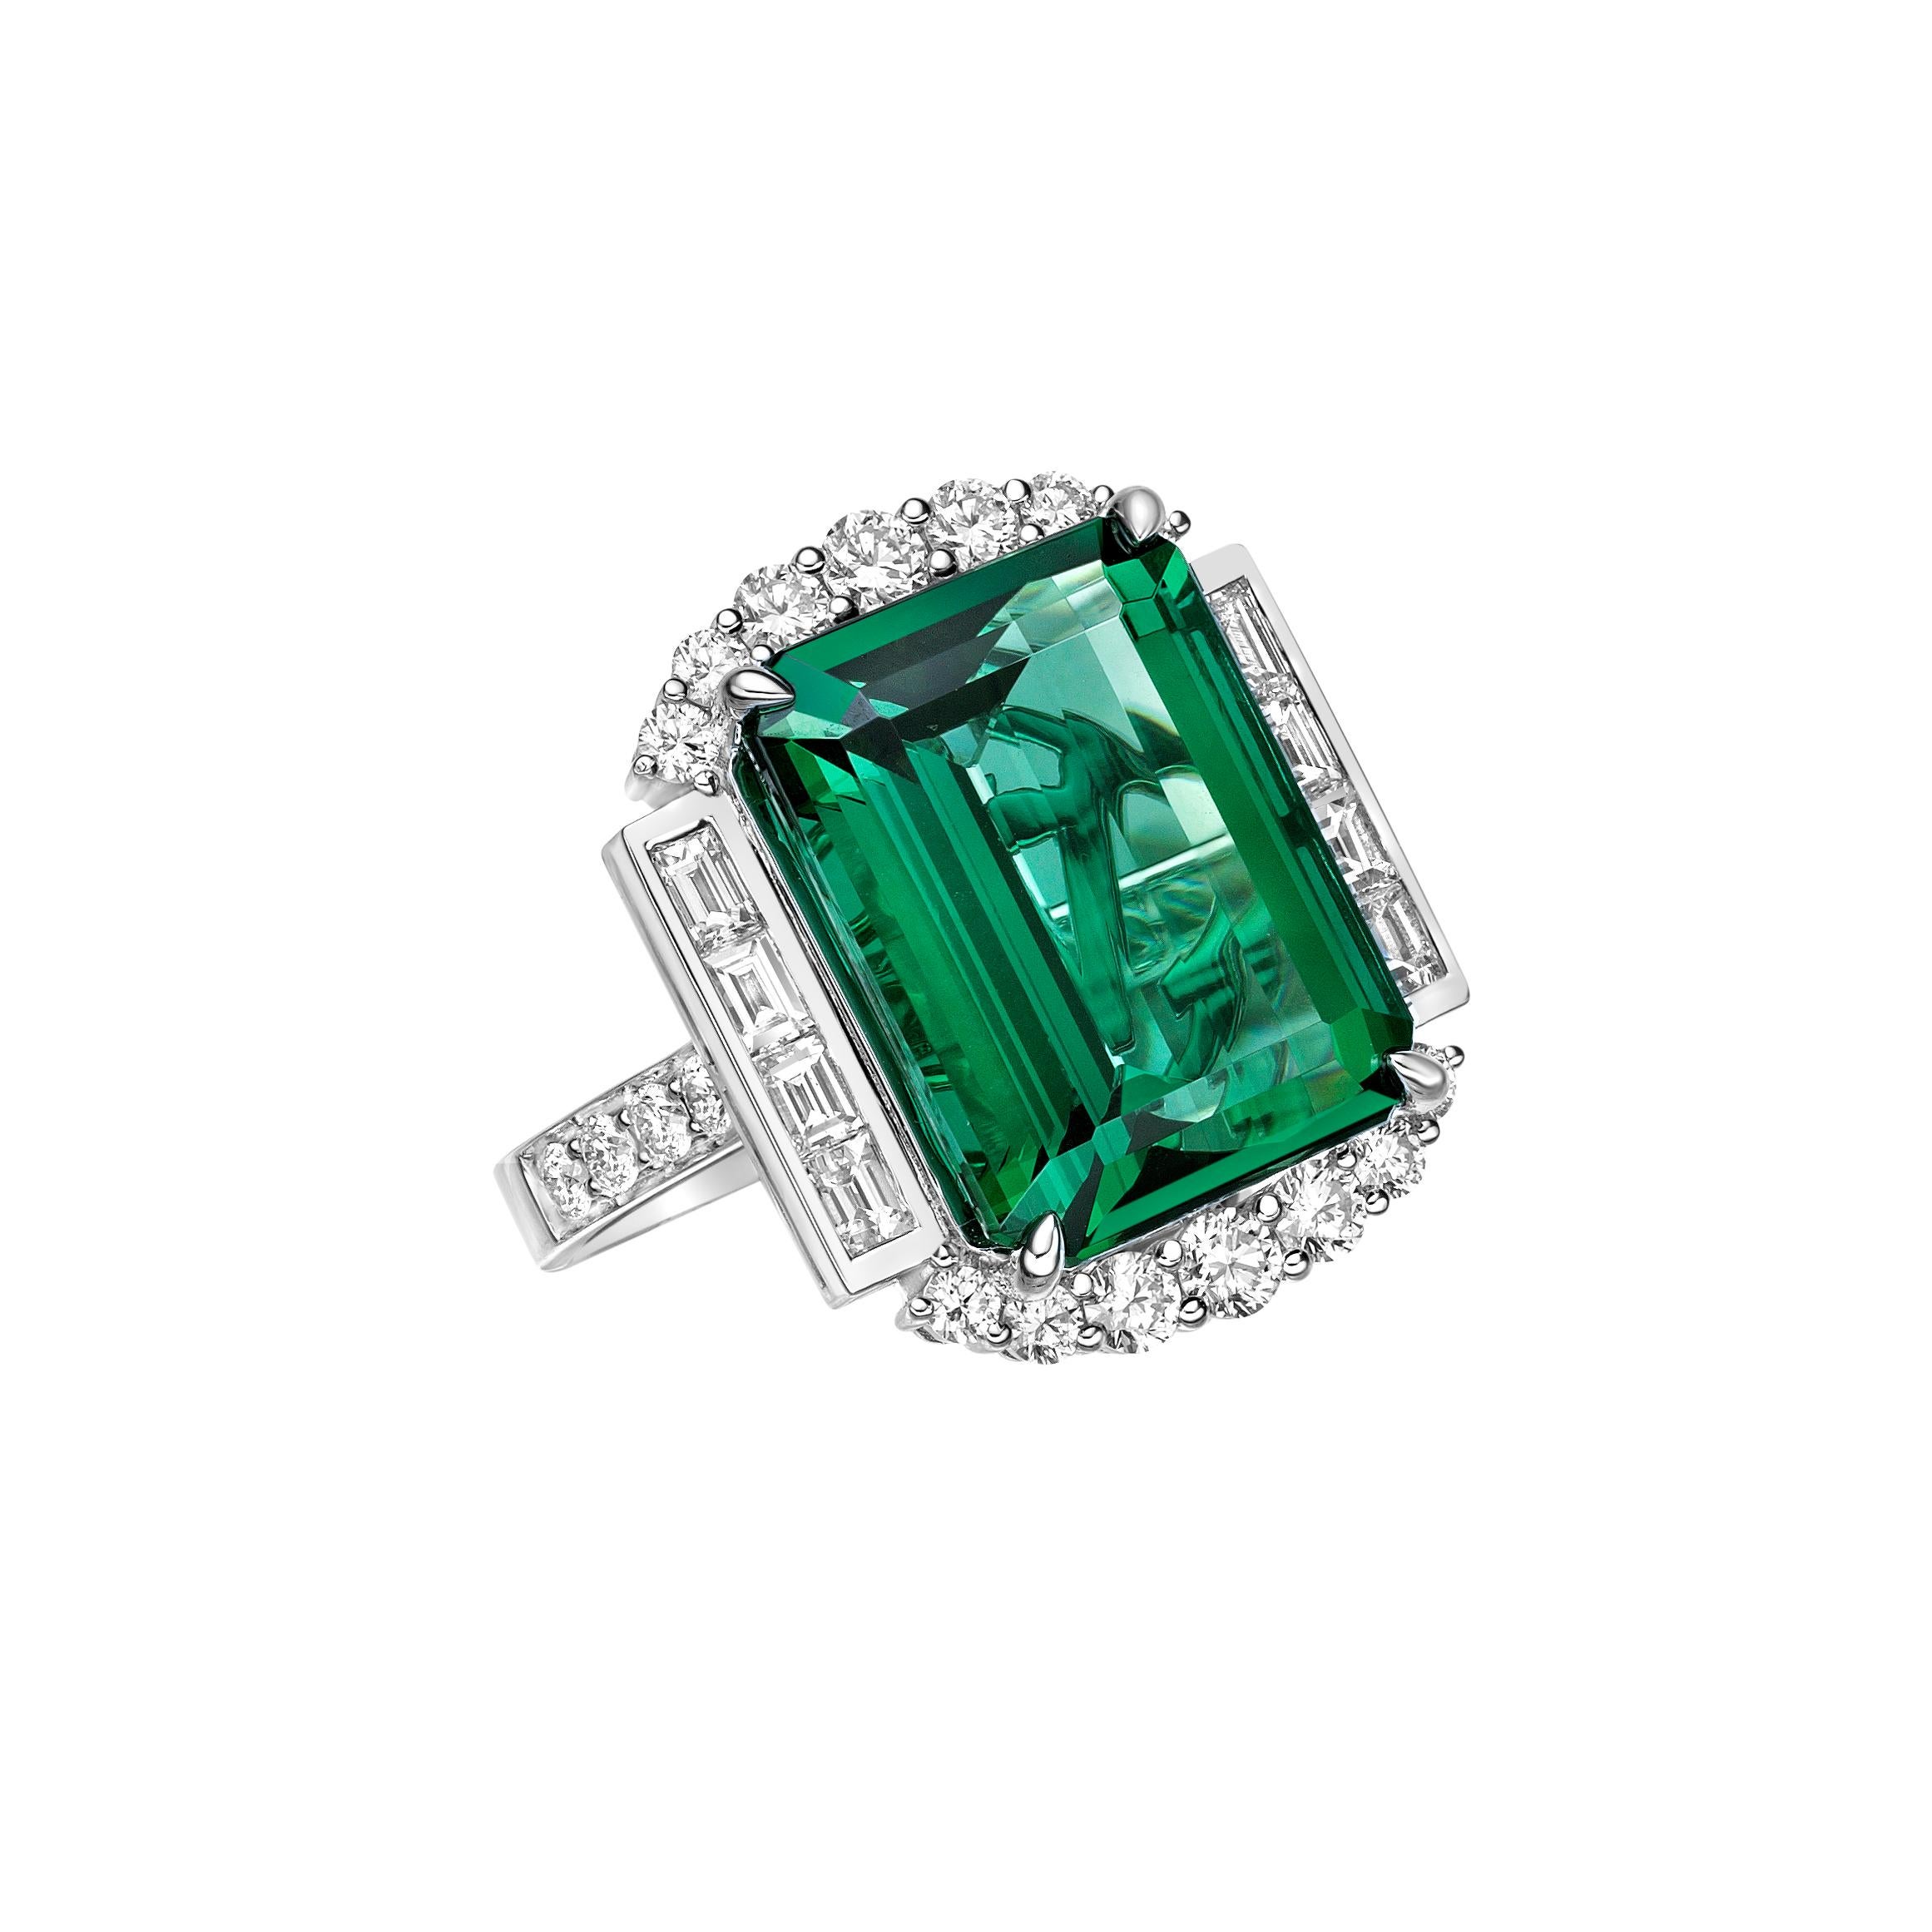 This collection features an array of Green Tourmaline with a Green hue that is as cool as it gets! Accented with diamonds this ring is made in white gold and present a classic yet elegant look.

Green Tourmaline Ring in 18 Karat White Gold with